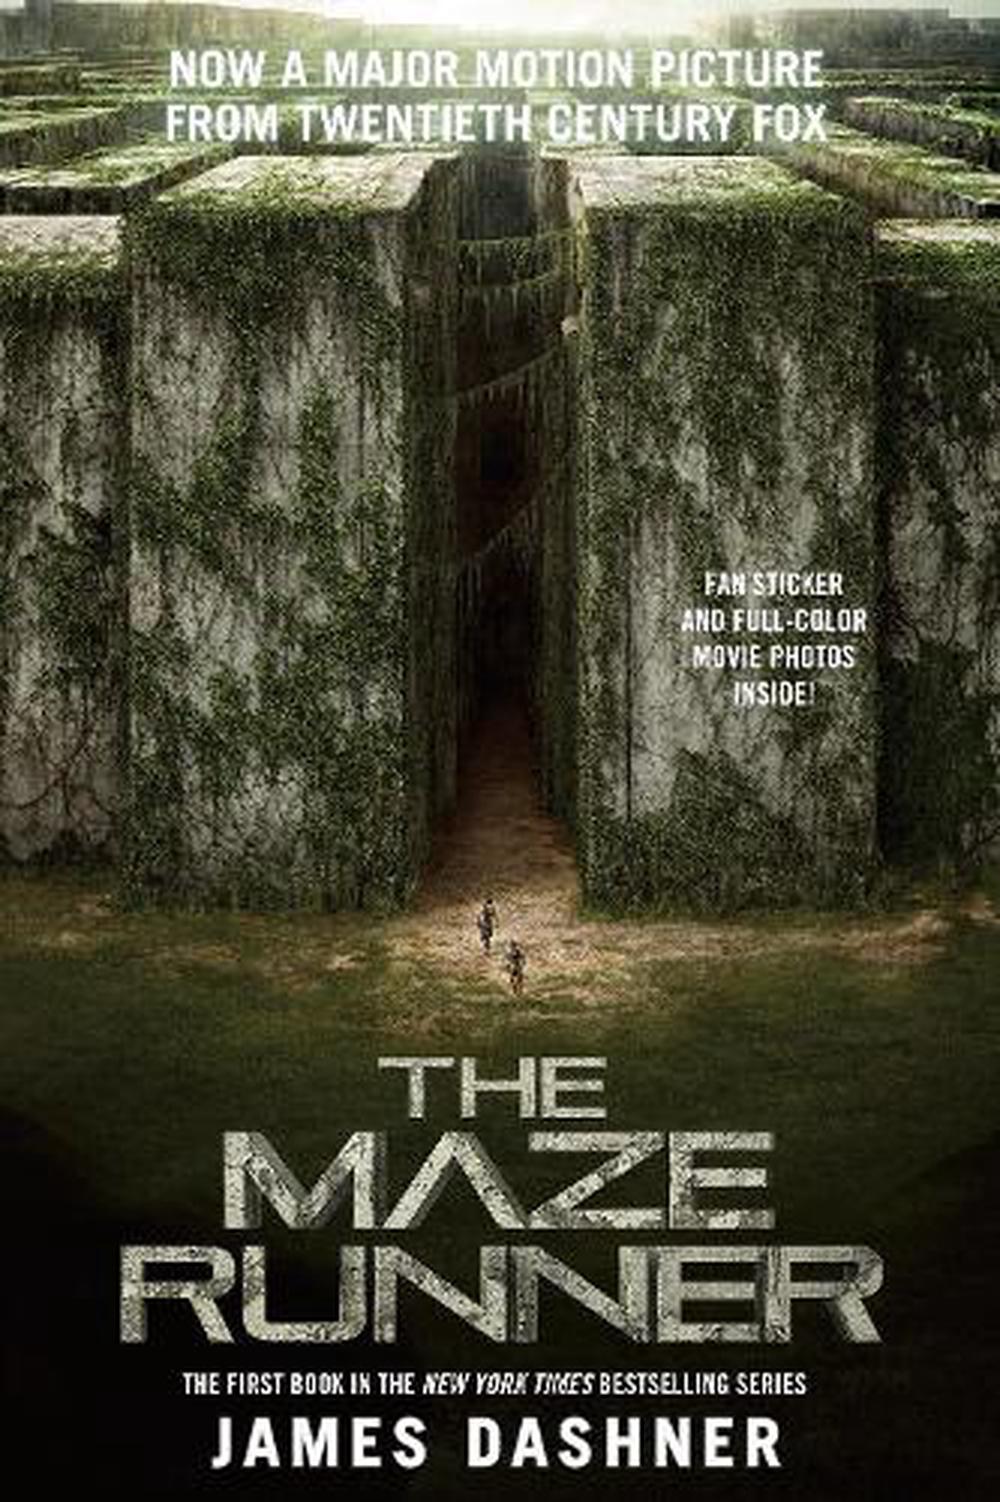 The Maze Runner by James Dashner (English) Paperback Book Free Shipping